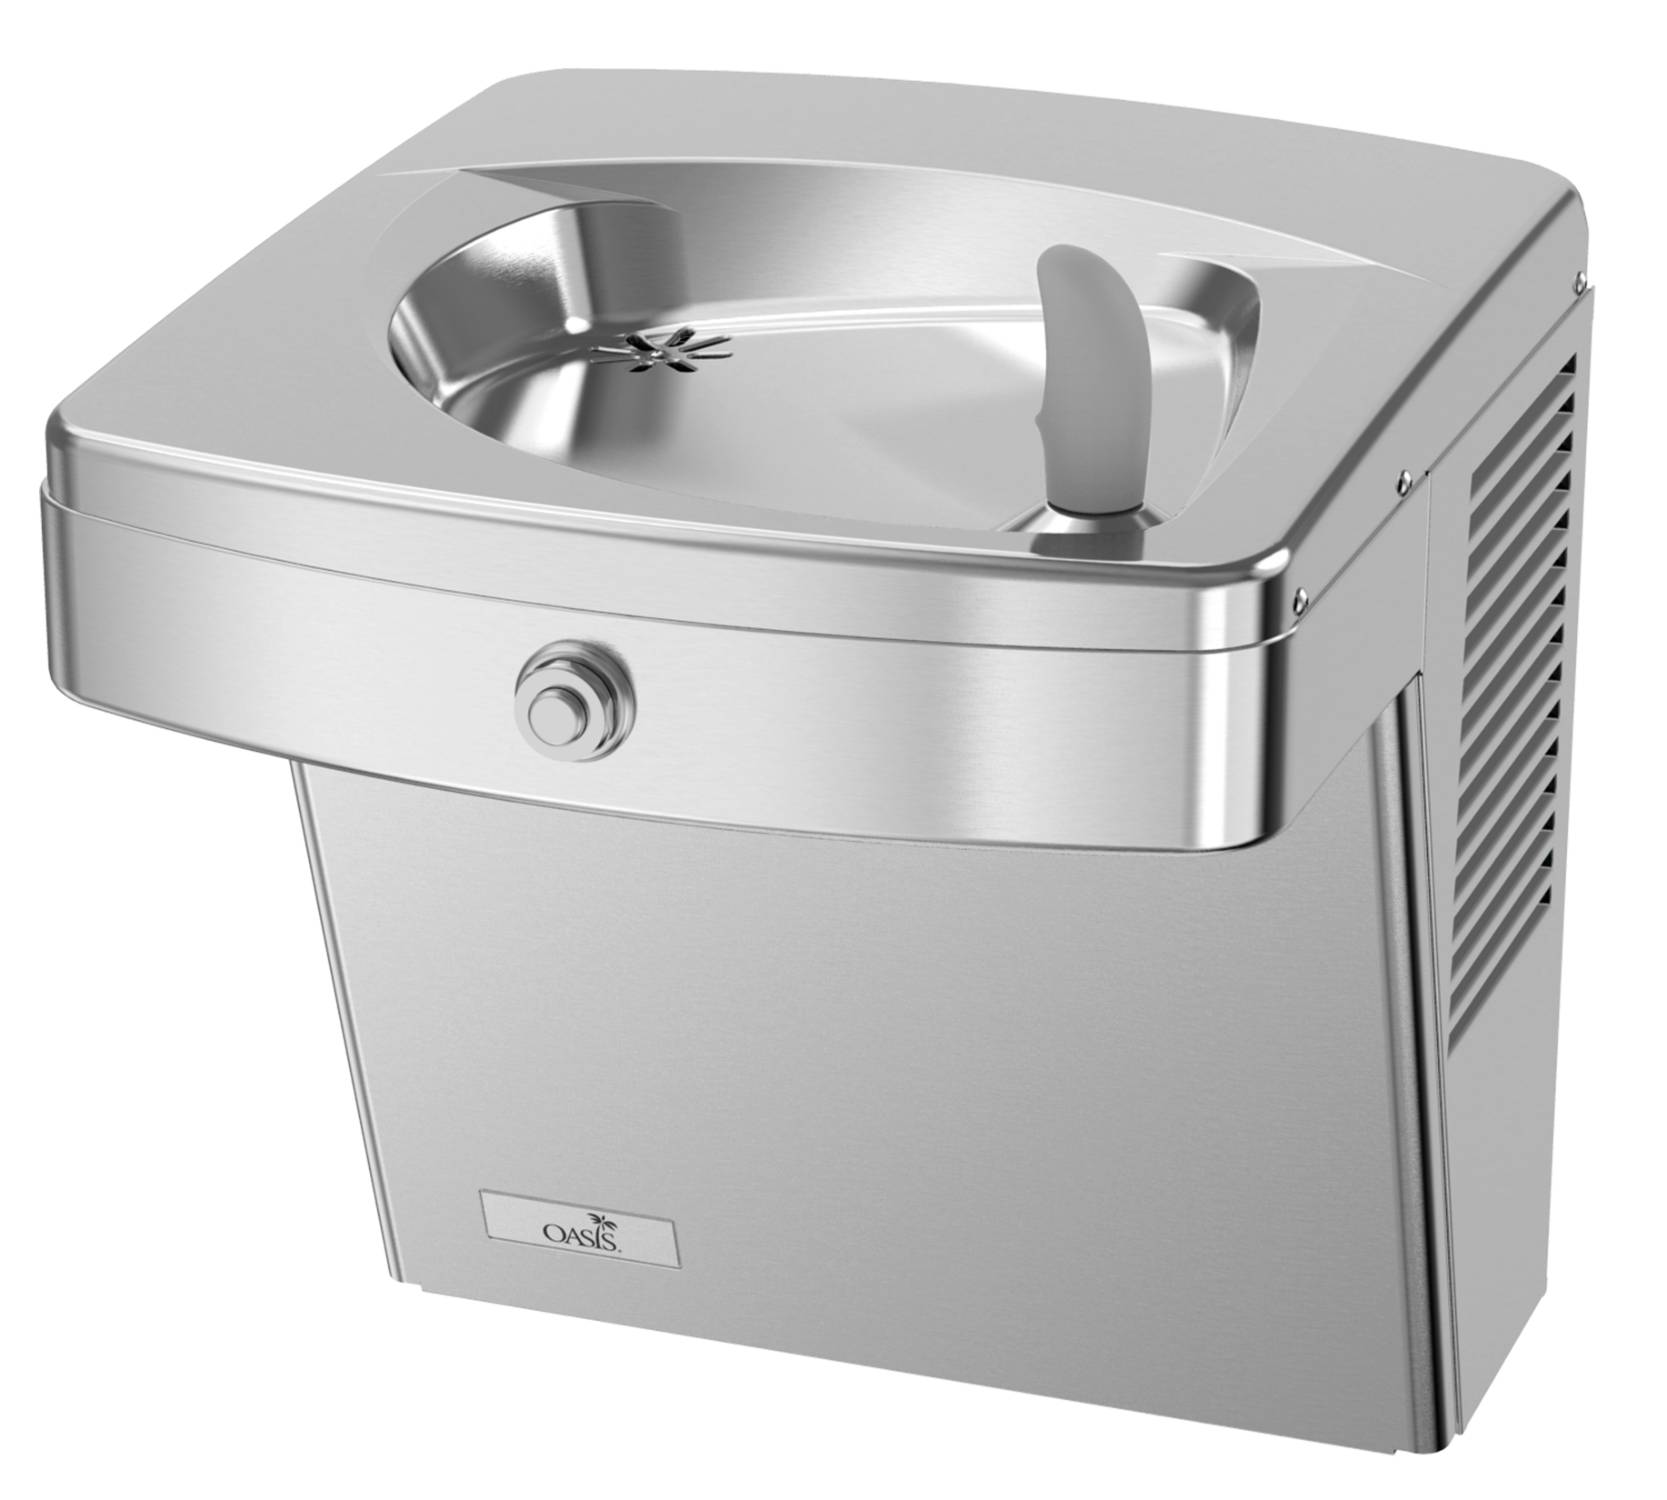 PV8ACY Manual Vandal Resistant Wall Mounted Drinking Fountain